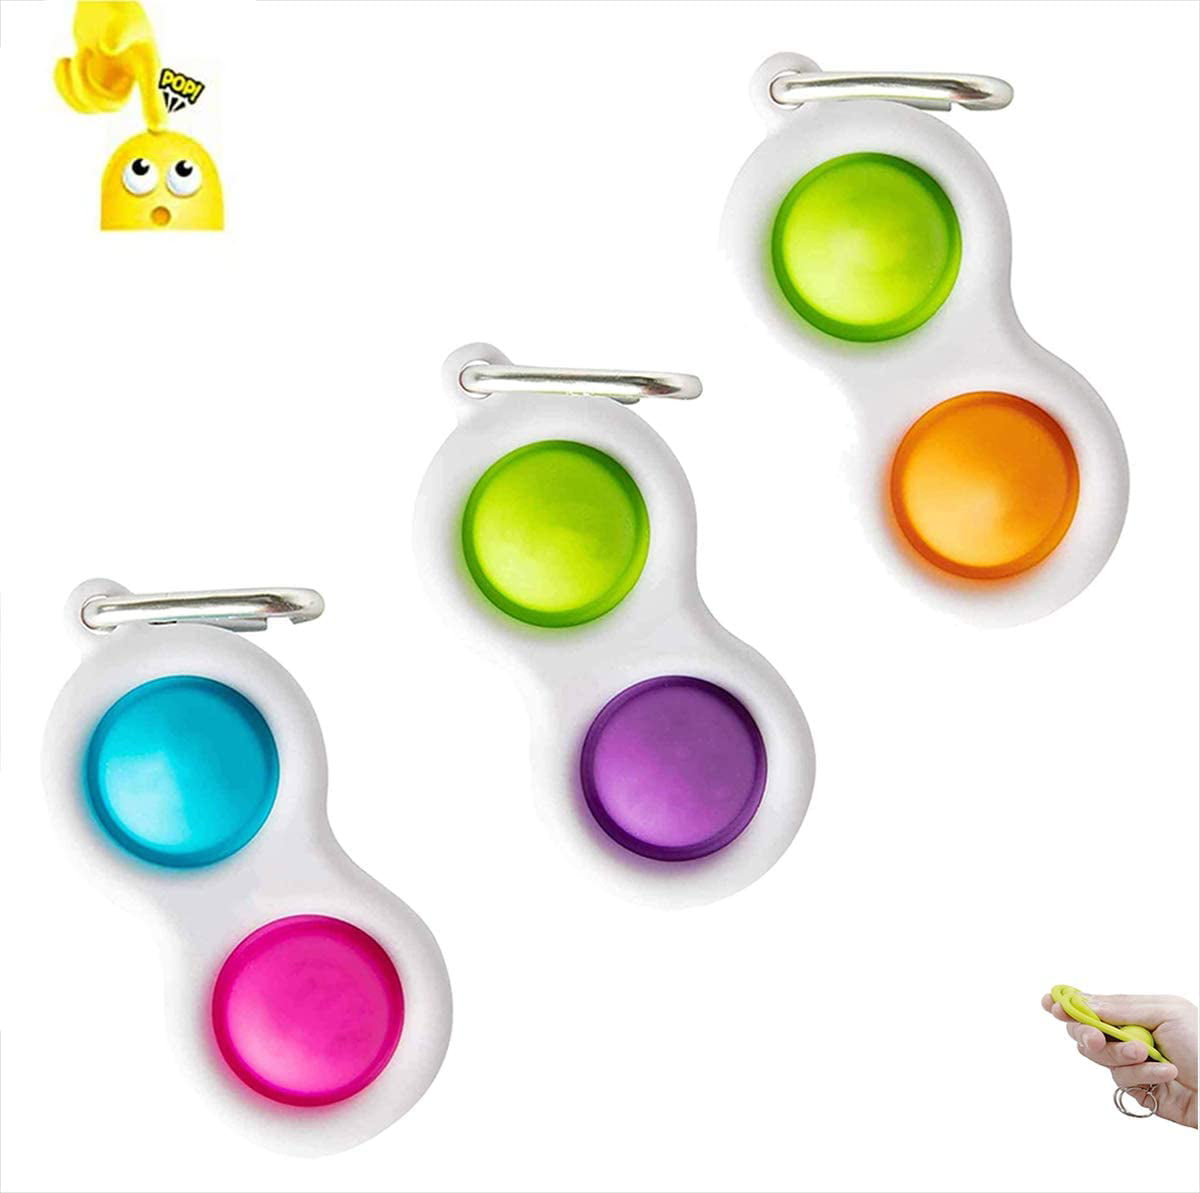 Baby Simple Dimple Sensory Toys Stress Relief Silicone Flipping Board Keychain 